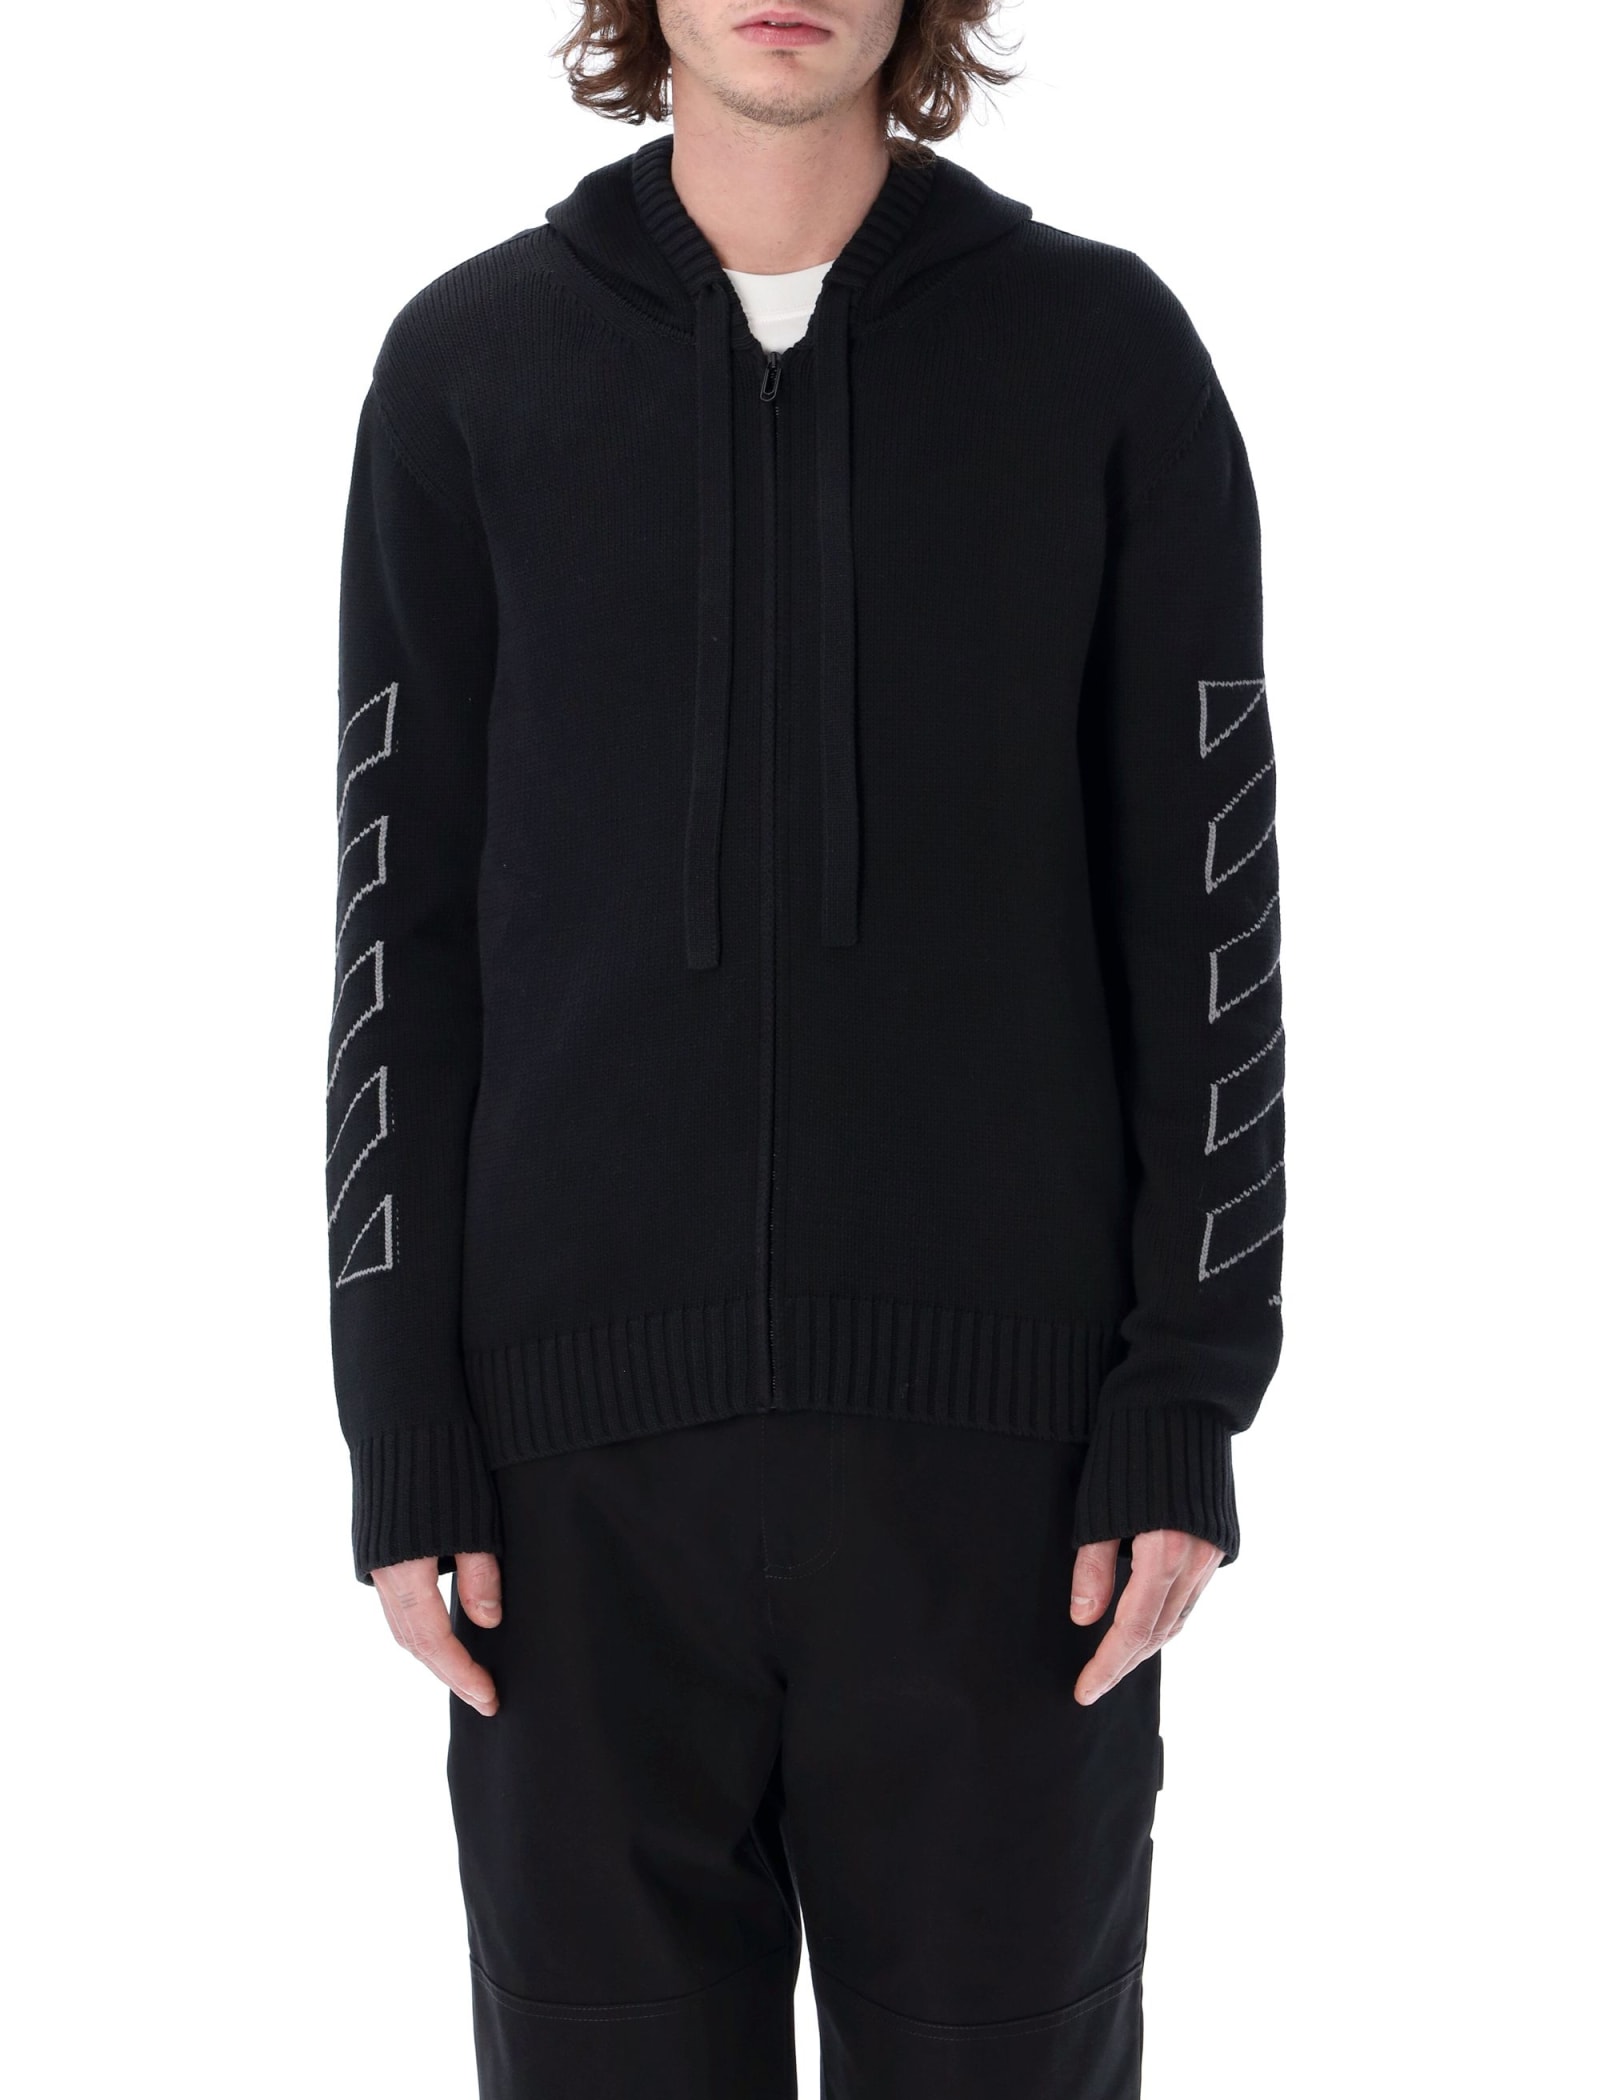 OFF-WHITE DIAG OUTLINE KNIT ZIPPED HOODIE